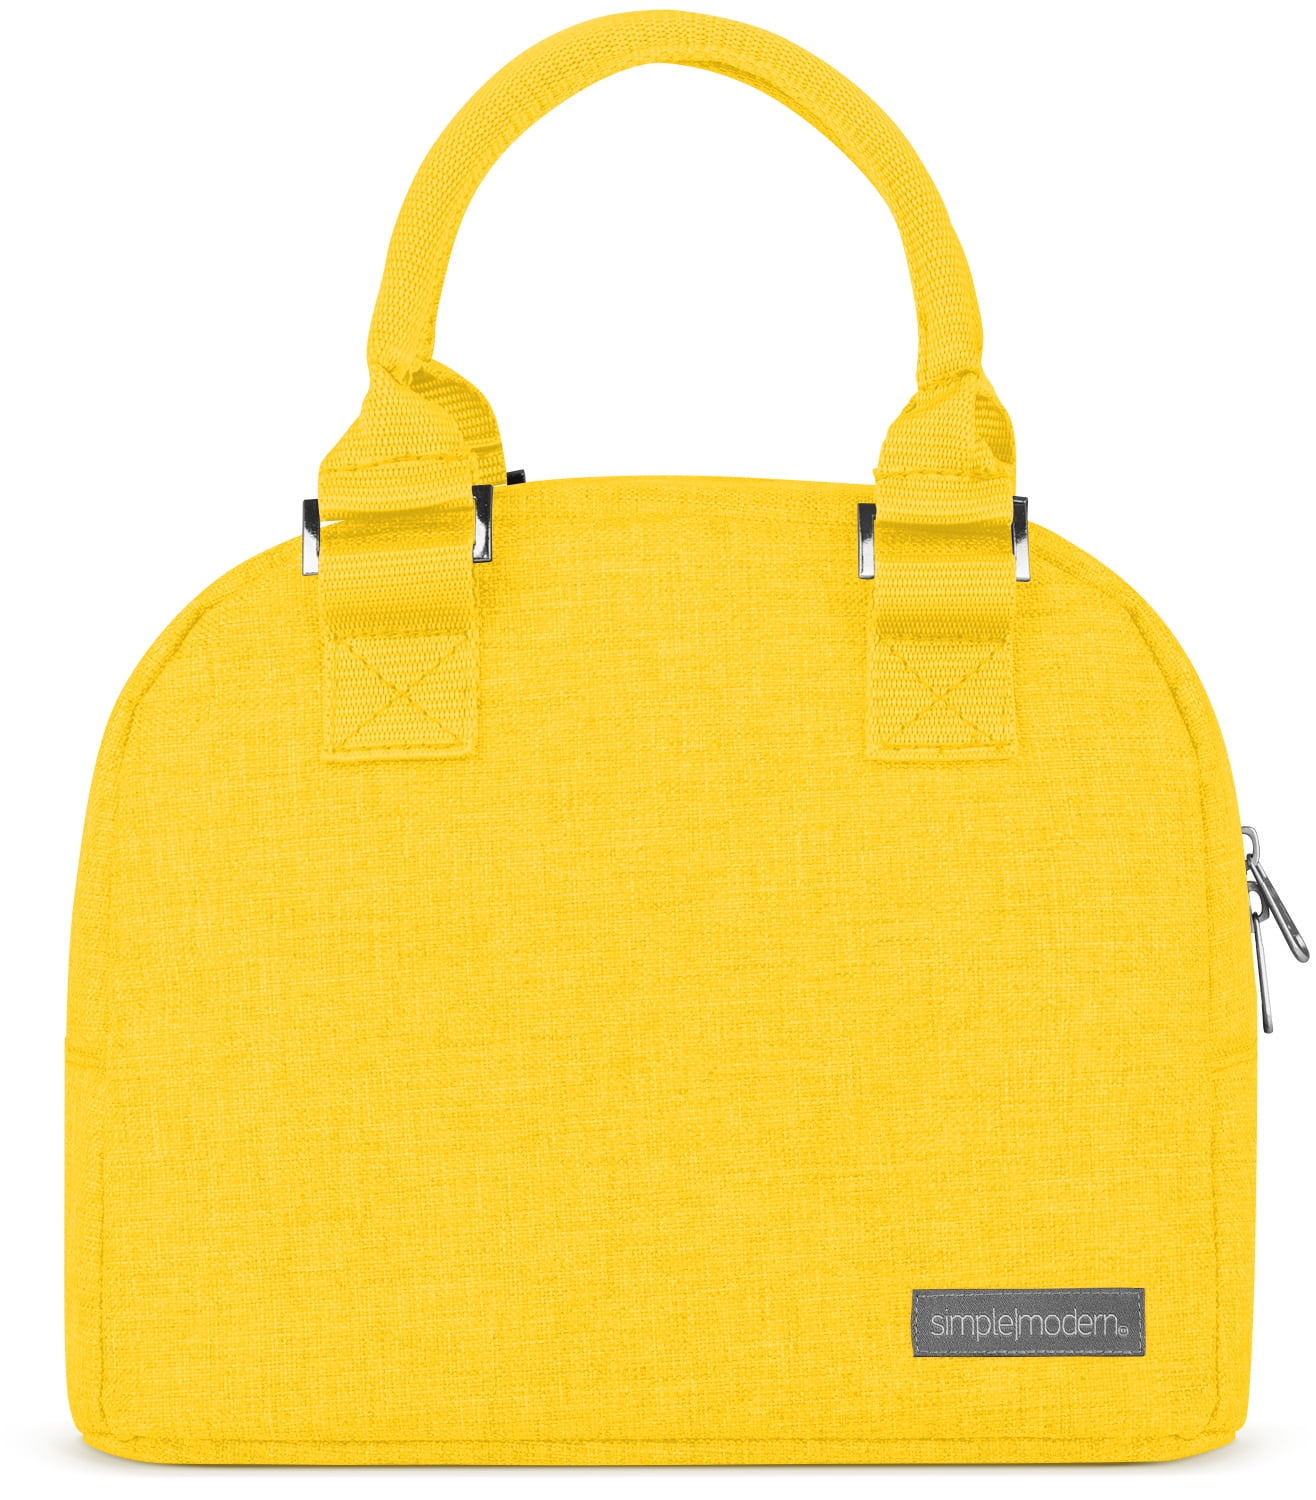 Simple Modern 5L Very Mia Lunch Bag for Women - Yellow Insulated Lunch Box -SUNSHINE